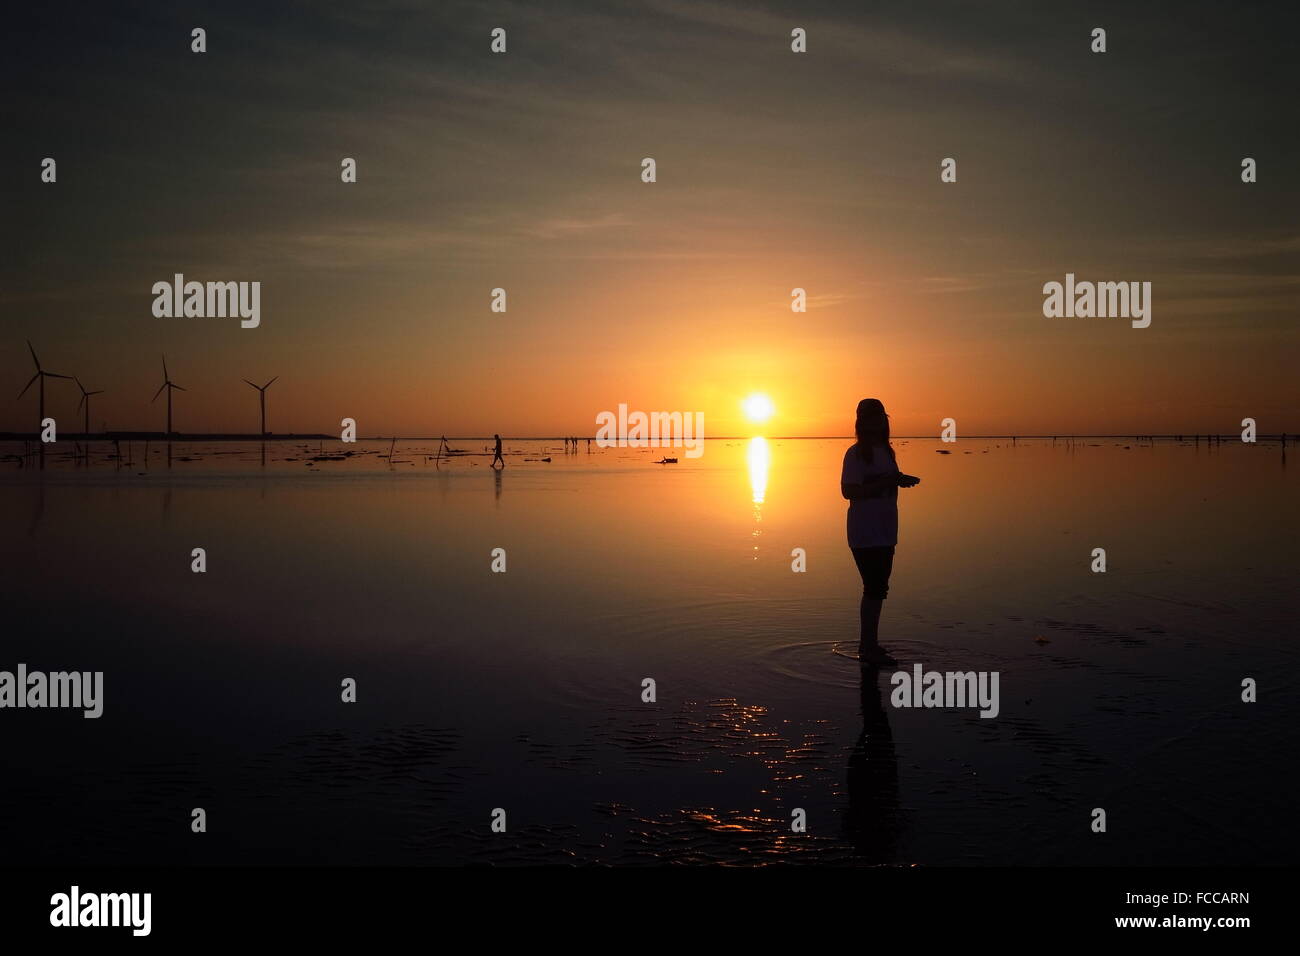 Silhouette Woman Standing On Beach At Sunset Stock Photo